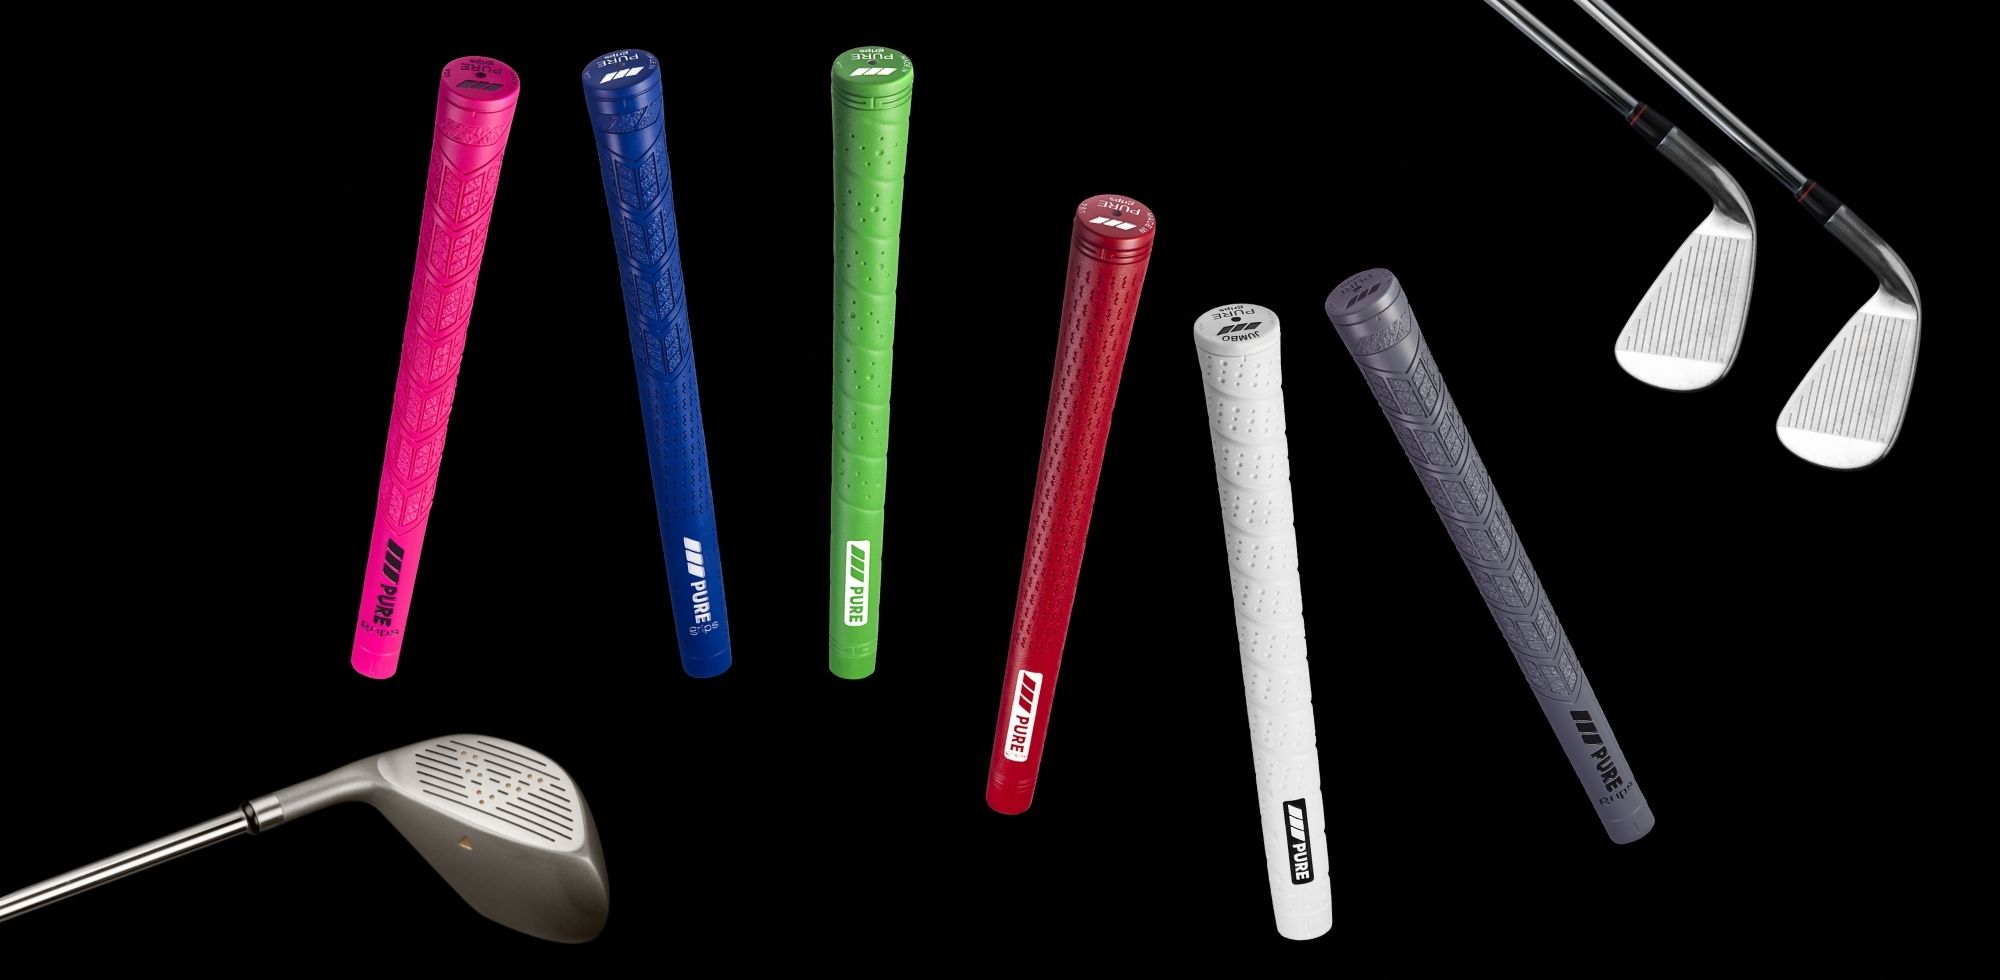 Use the PURE Grips Golf Grip Selector to find the right golf grip for you